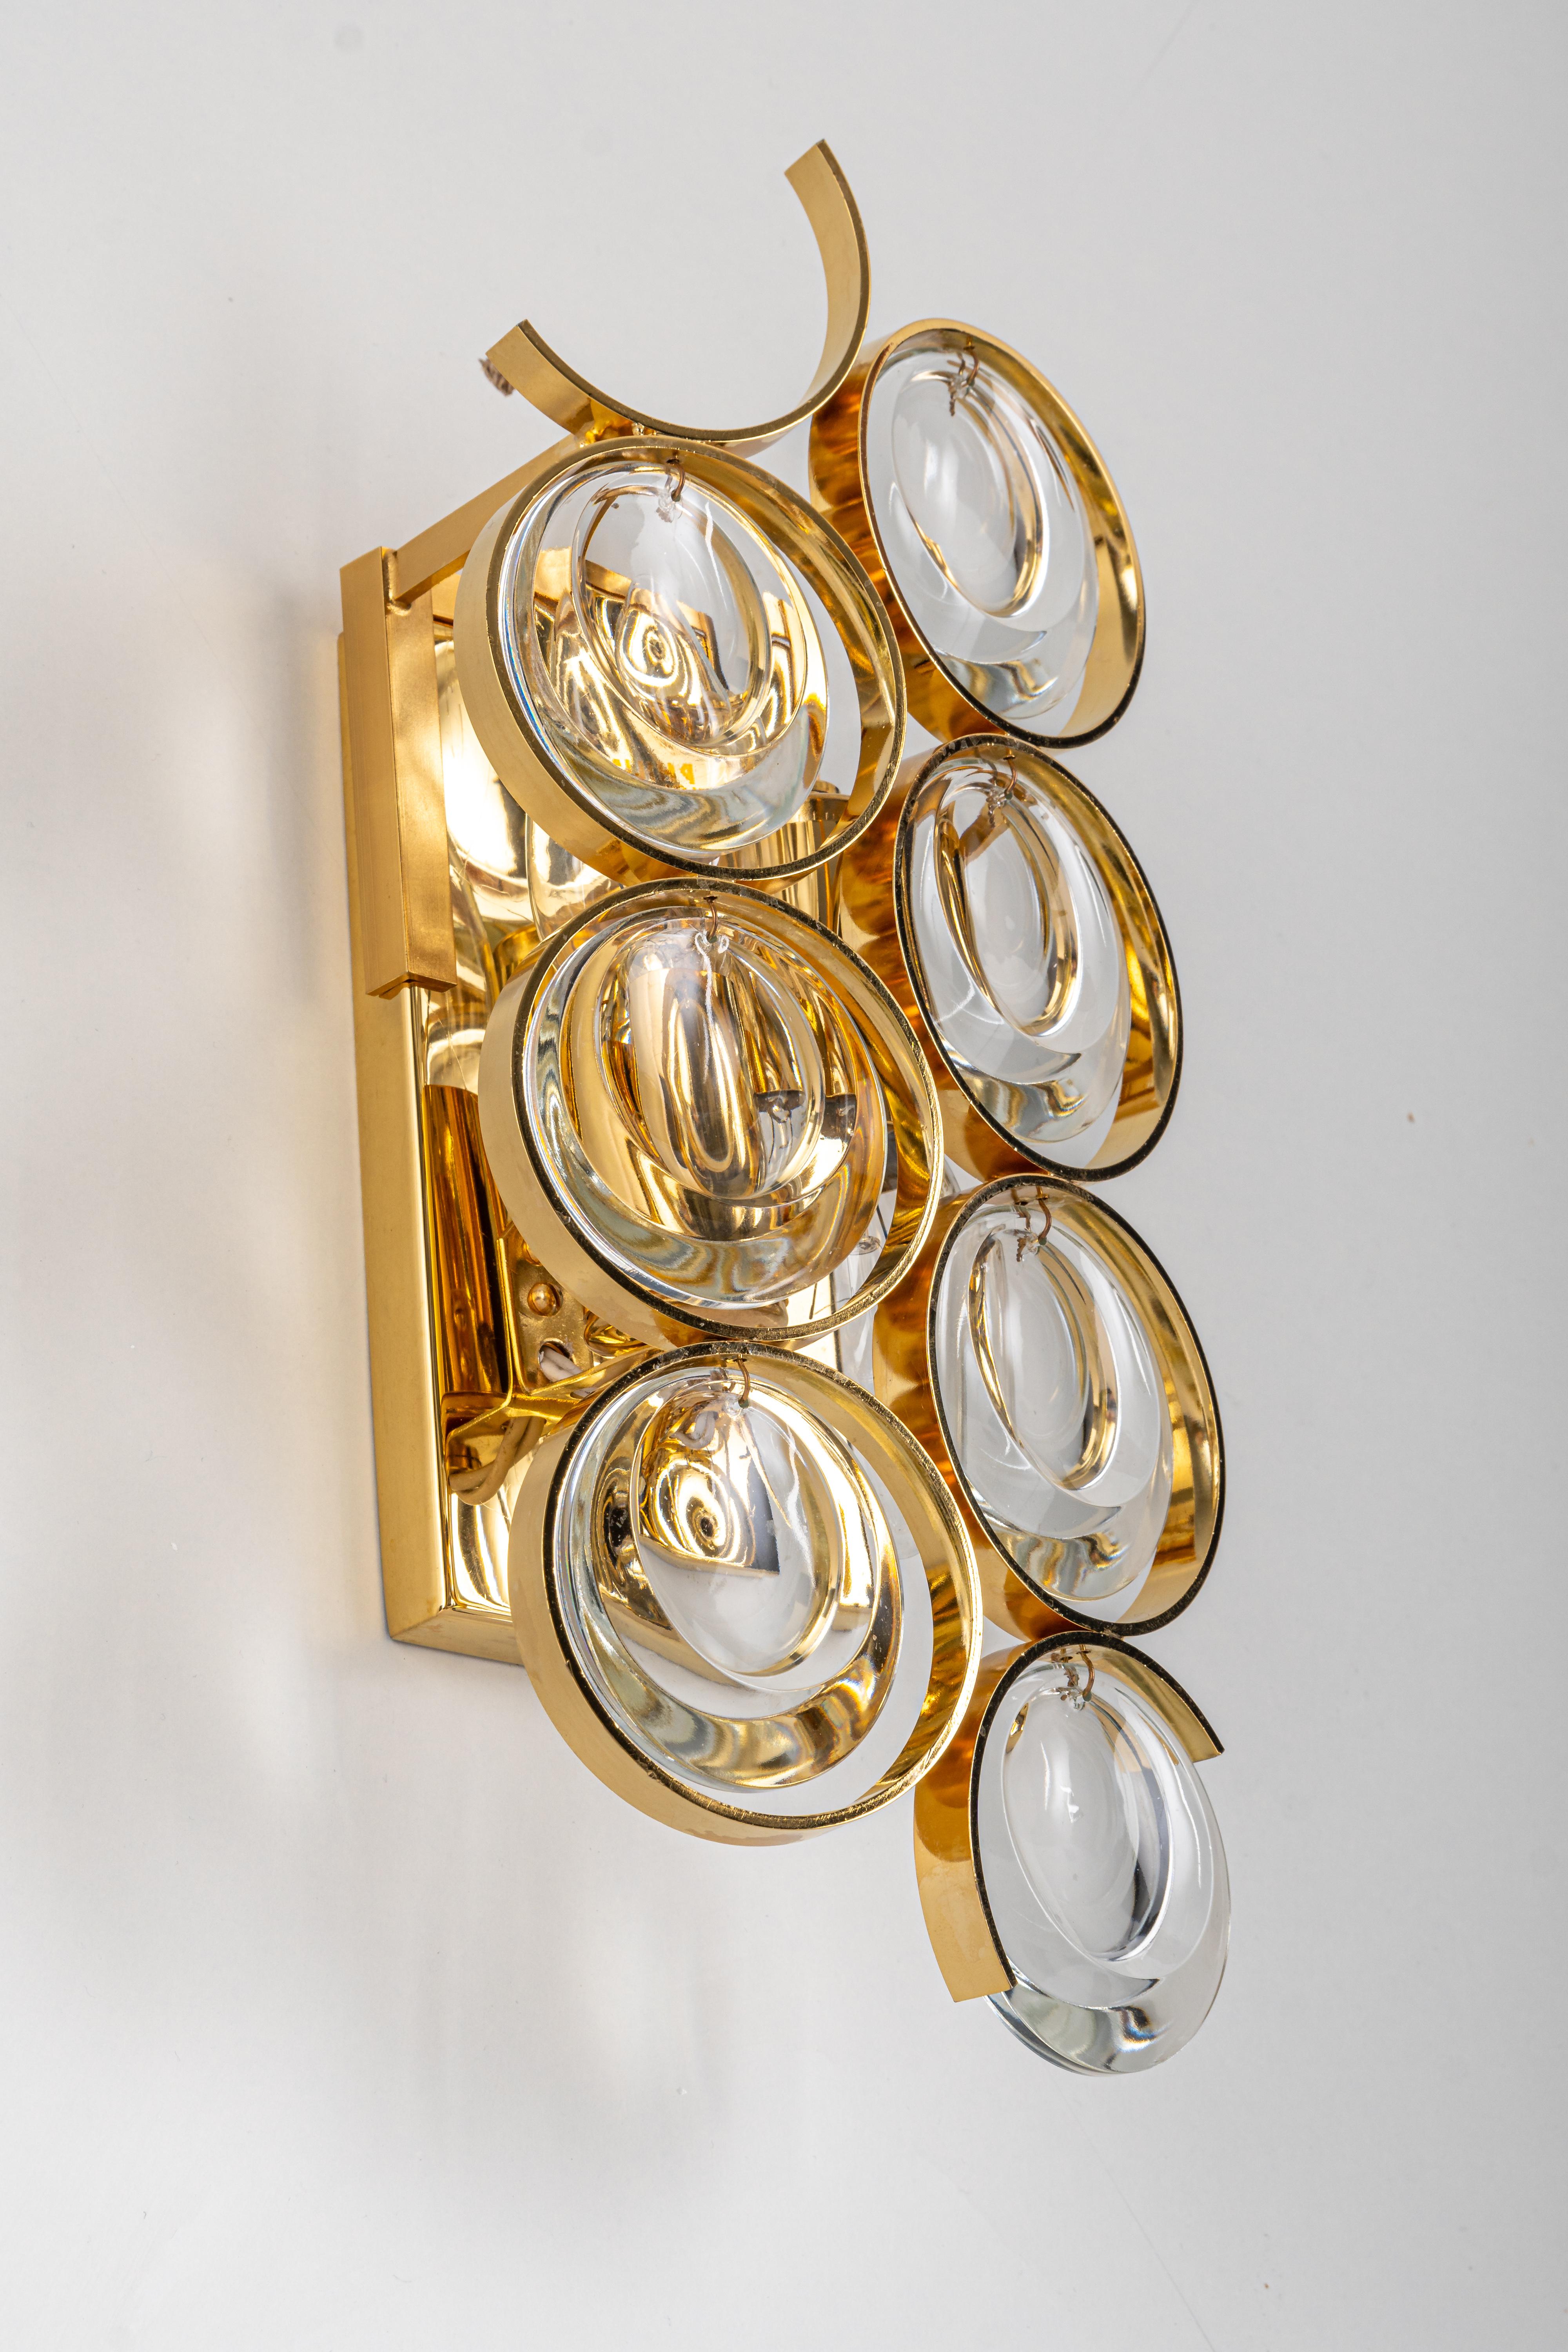 A stunning golden sconce, made by Palwa, Germany, circa 1960-1969. Crystal glasses on a gilt brass frame.
Best of the 1960s from Germany.

High quality and in very good condition. Cleaned, well-wired, and ready to use. 
The sconce requires 2 x